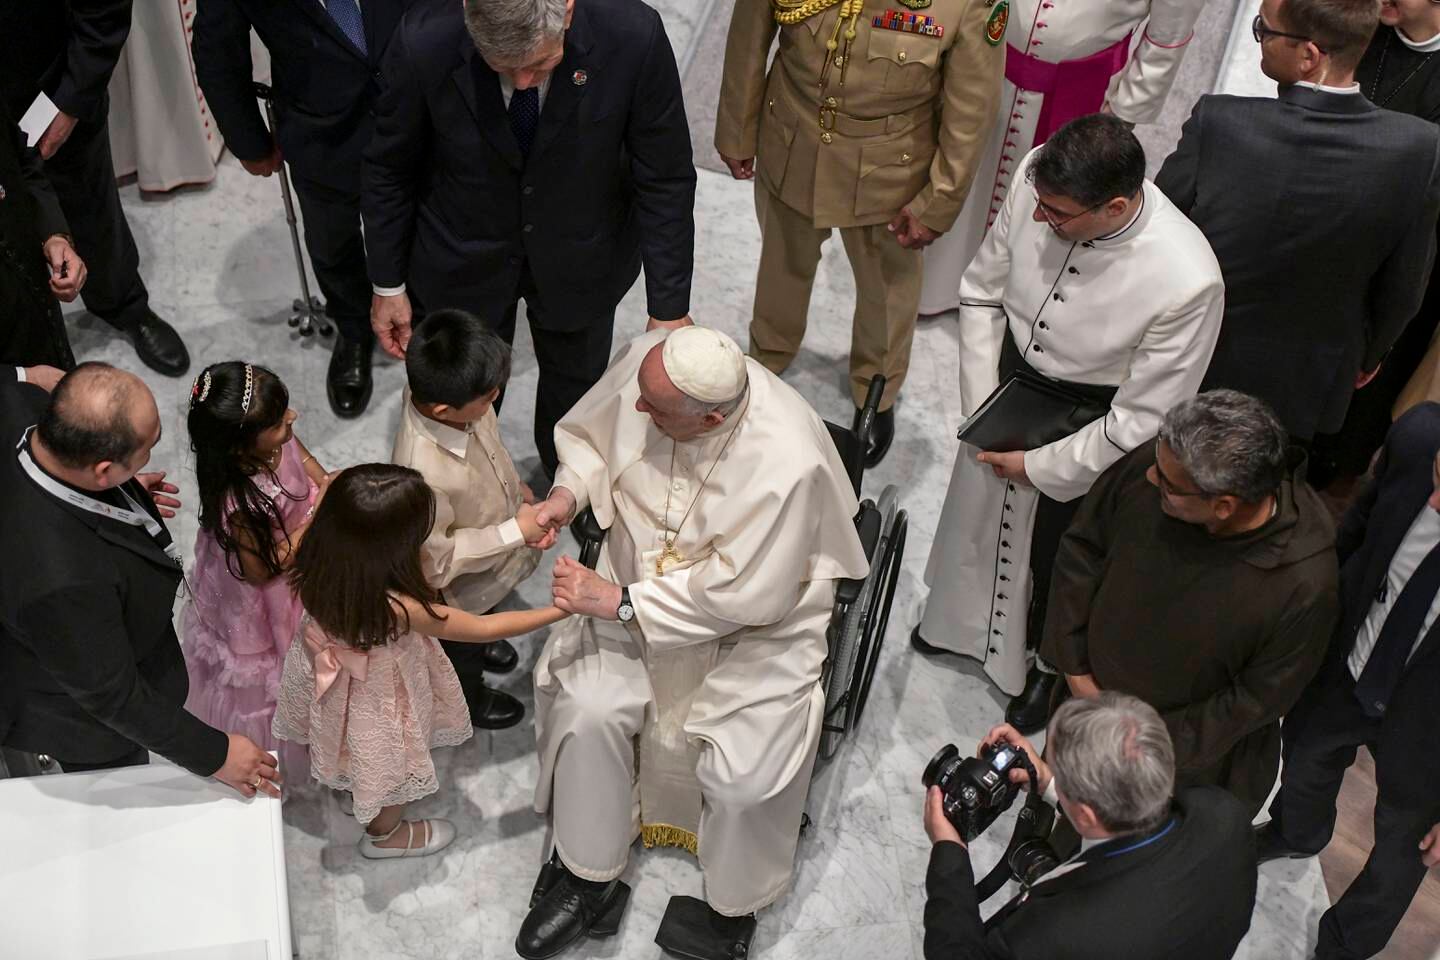 Pope Francis greets young children at the Cathedral of Our Lady of Arabia, Bahrain. Khushnum Bhandari / The National